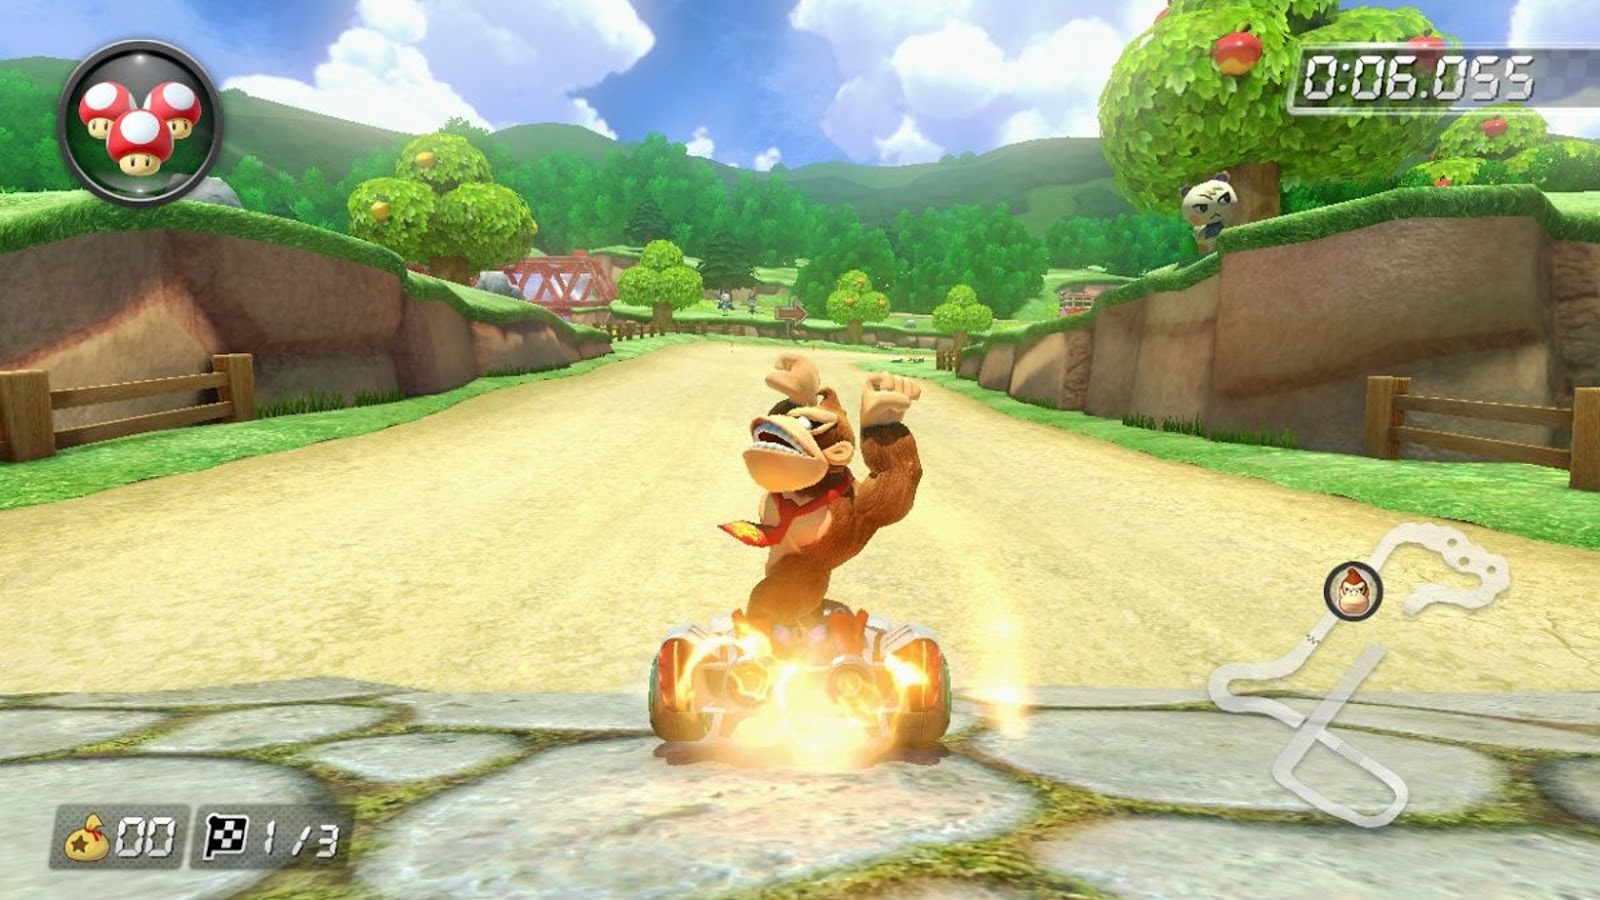 How To Unlock All The Stars In Mario Kart 8